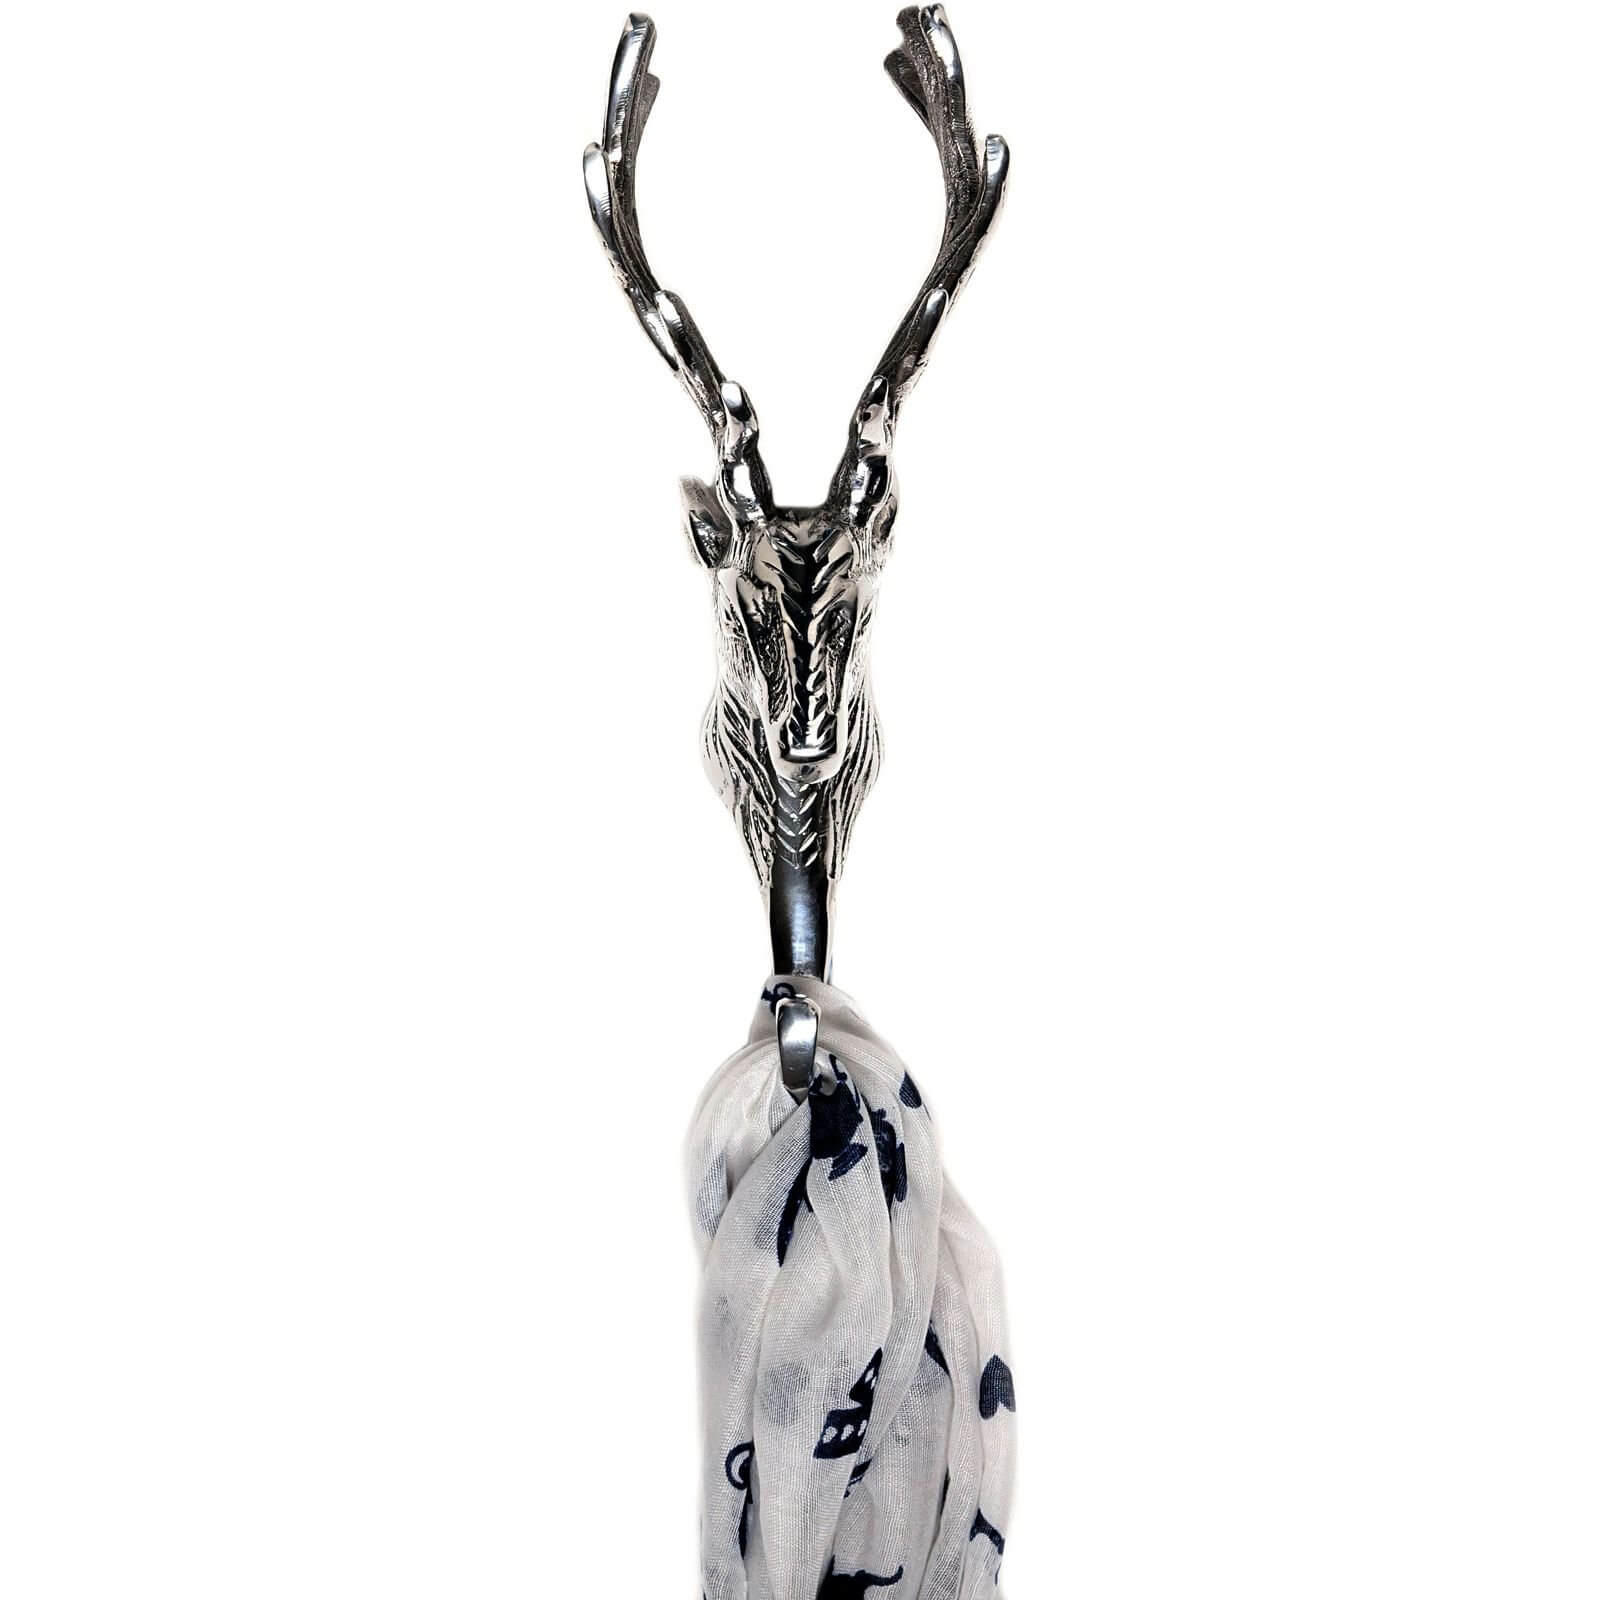 Silver Finish Stag Head Coat Hook